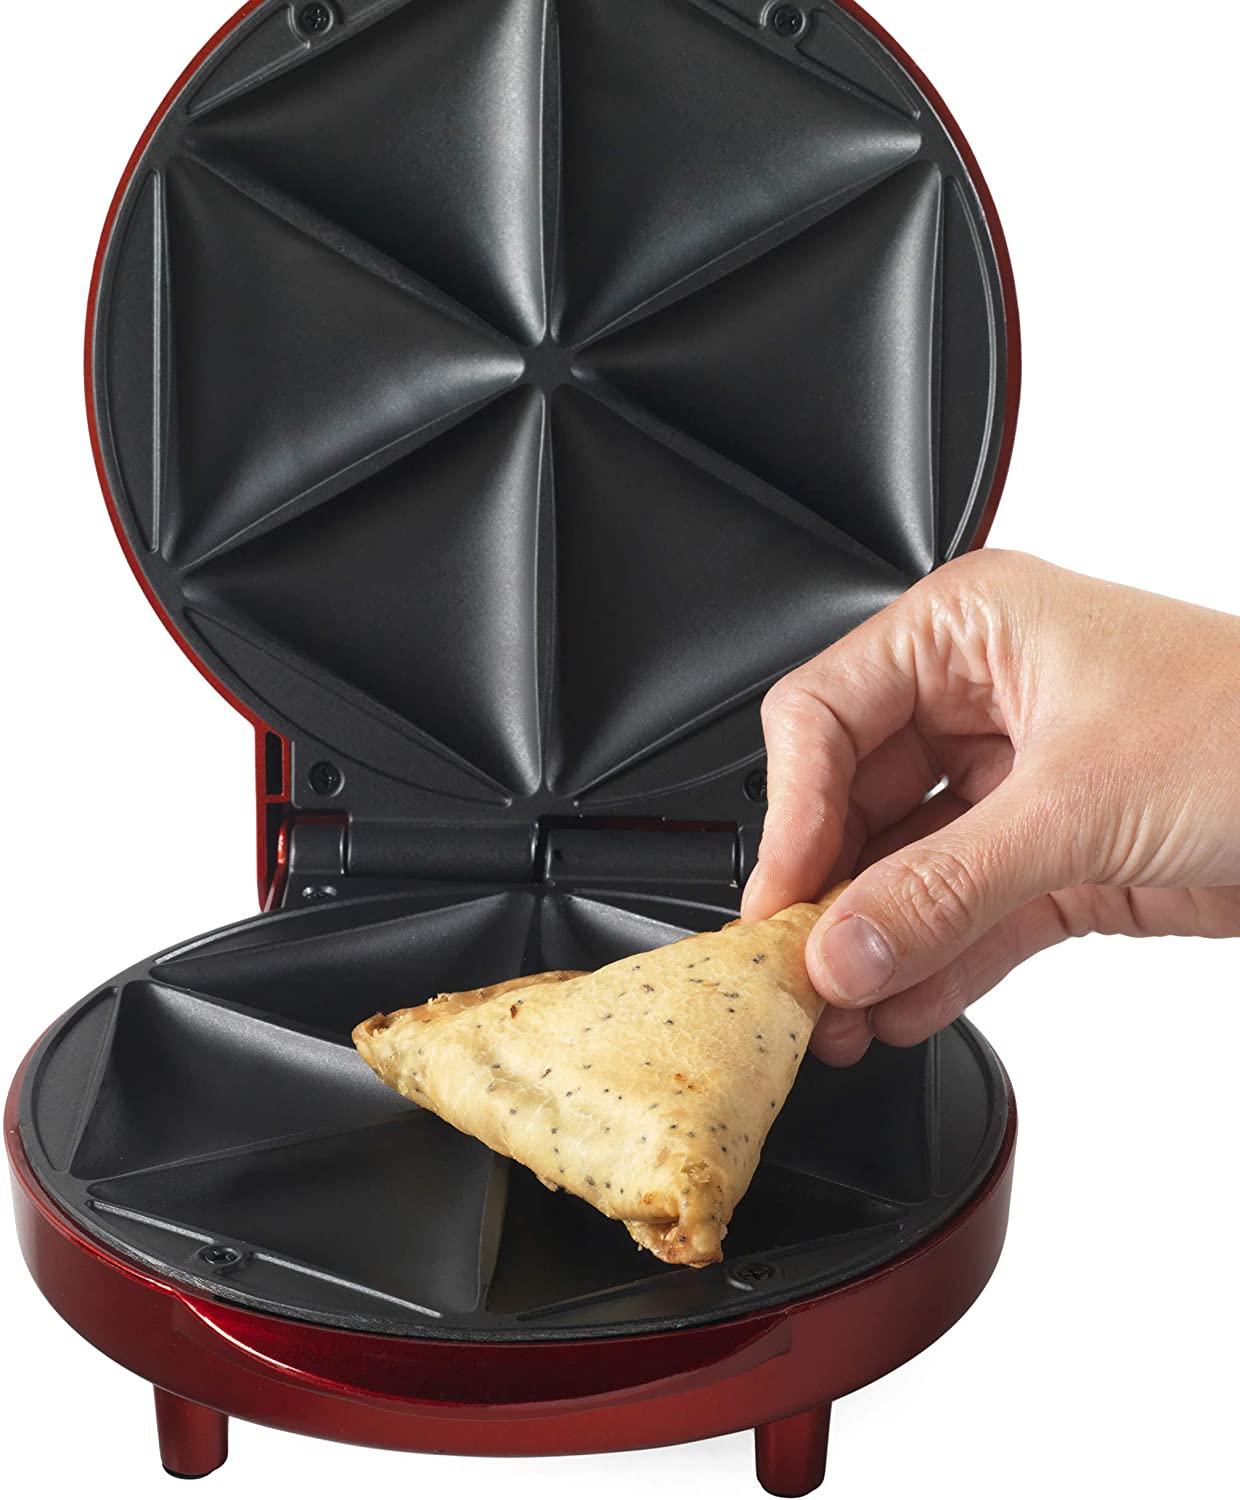 Giles & Posner Samosa Maker with Non-Stick Coated Cooking Plates